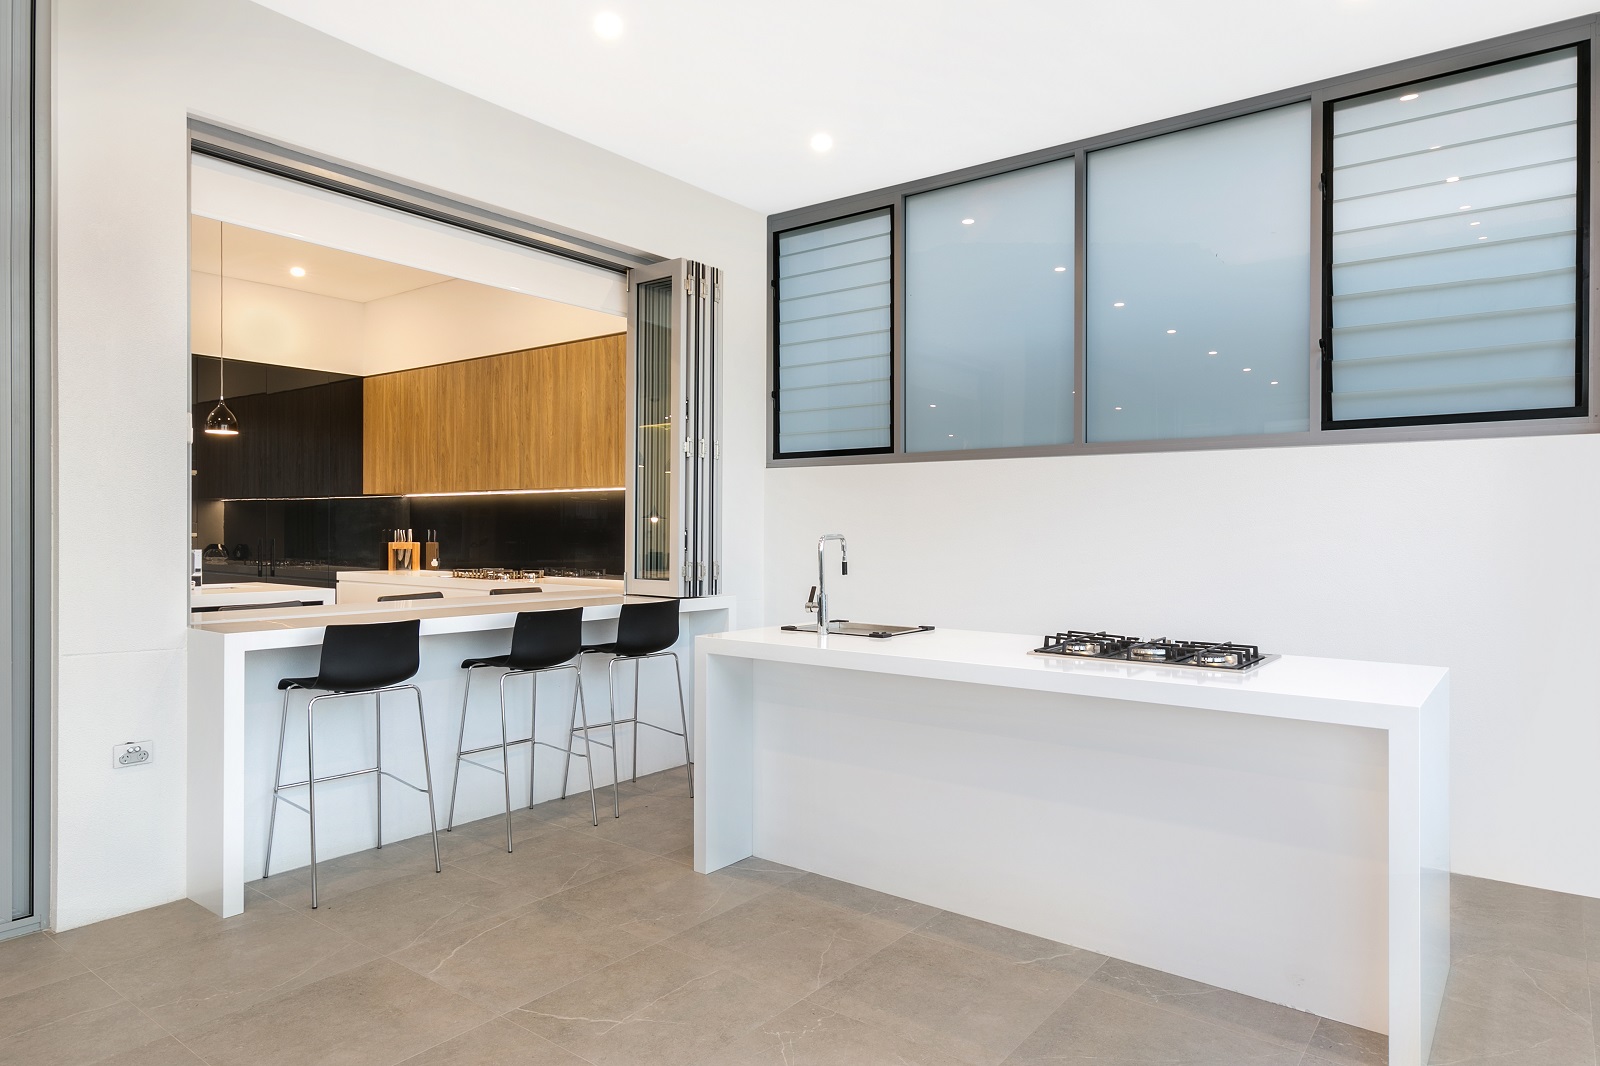 Guildford Sydney, Ultraglaze / Likewood kitchen with a feature island cube in a Calacutta Marble